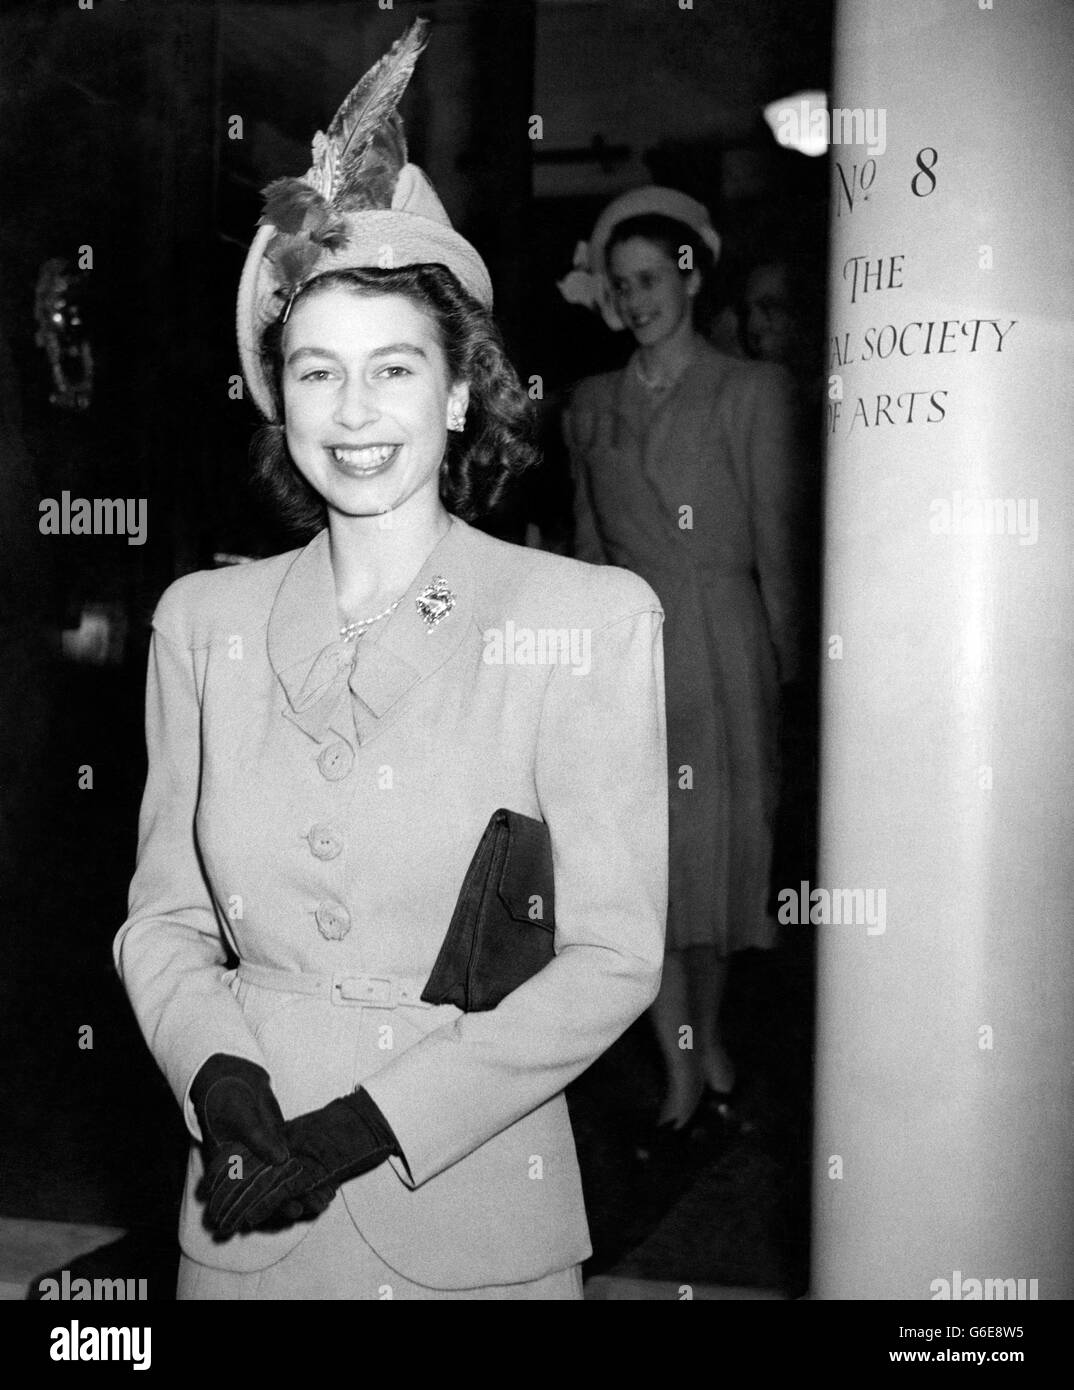 PRINCESS ELIZABETH officially reopened the war damaged Royal Society of Arts Lecture Hall, London, in her capacity as President of the Society. Picture Shows: PRINCESS ELIZABETH leaving the Royal Society of Arts Lecture Hall after the re-opening. Stock Photo